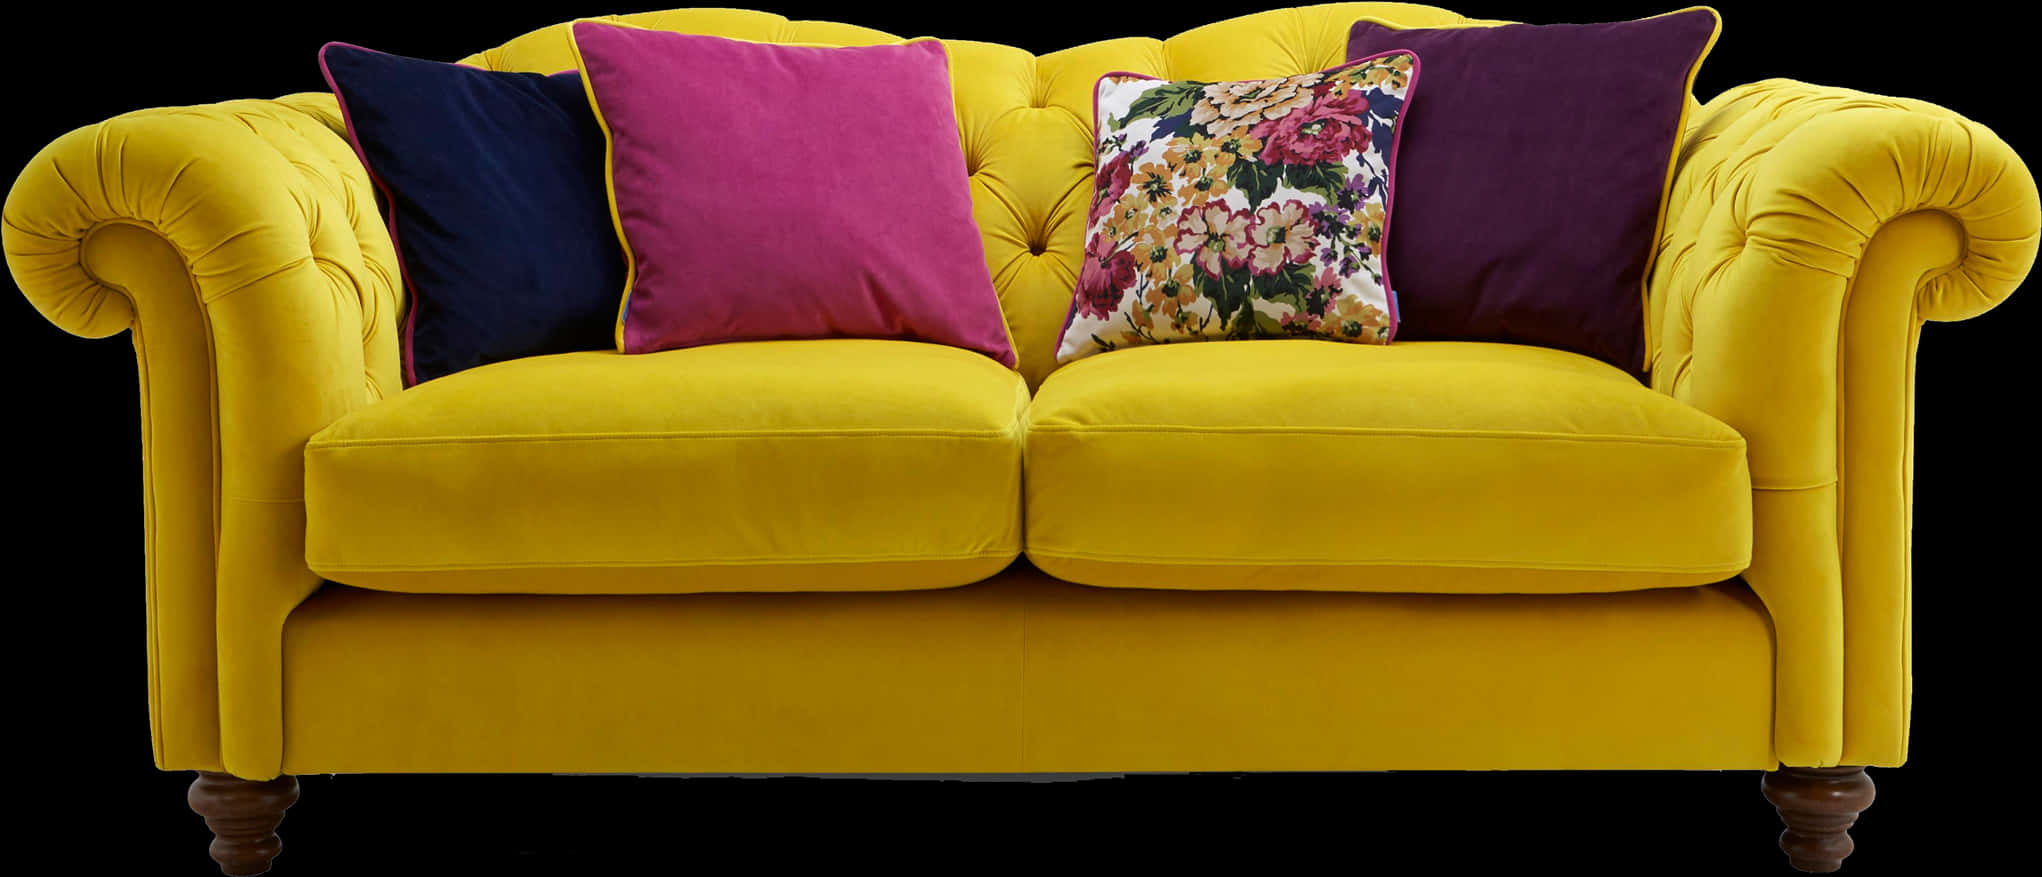 Vibrant Yellow Chesterfield Sofawith Cushions.jpg PNG